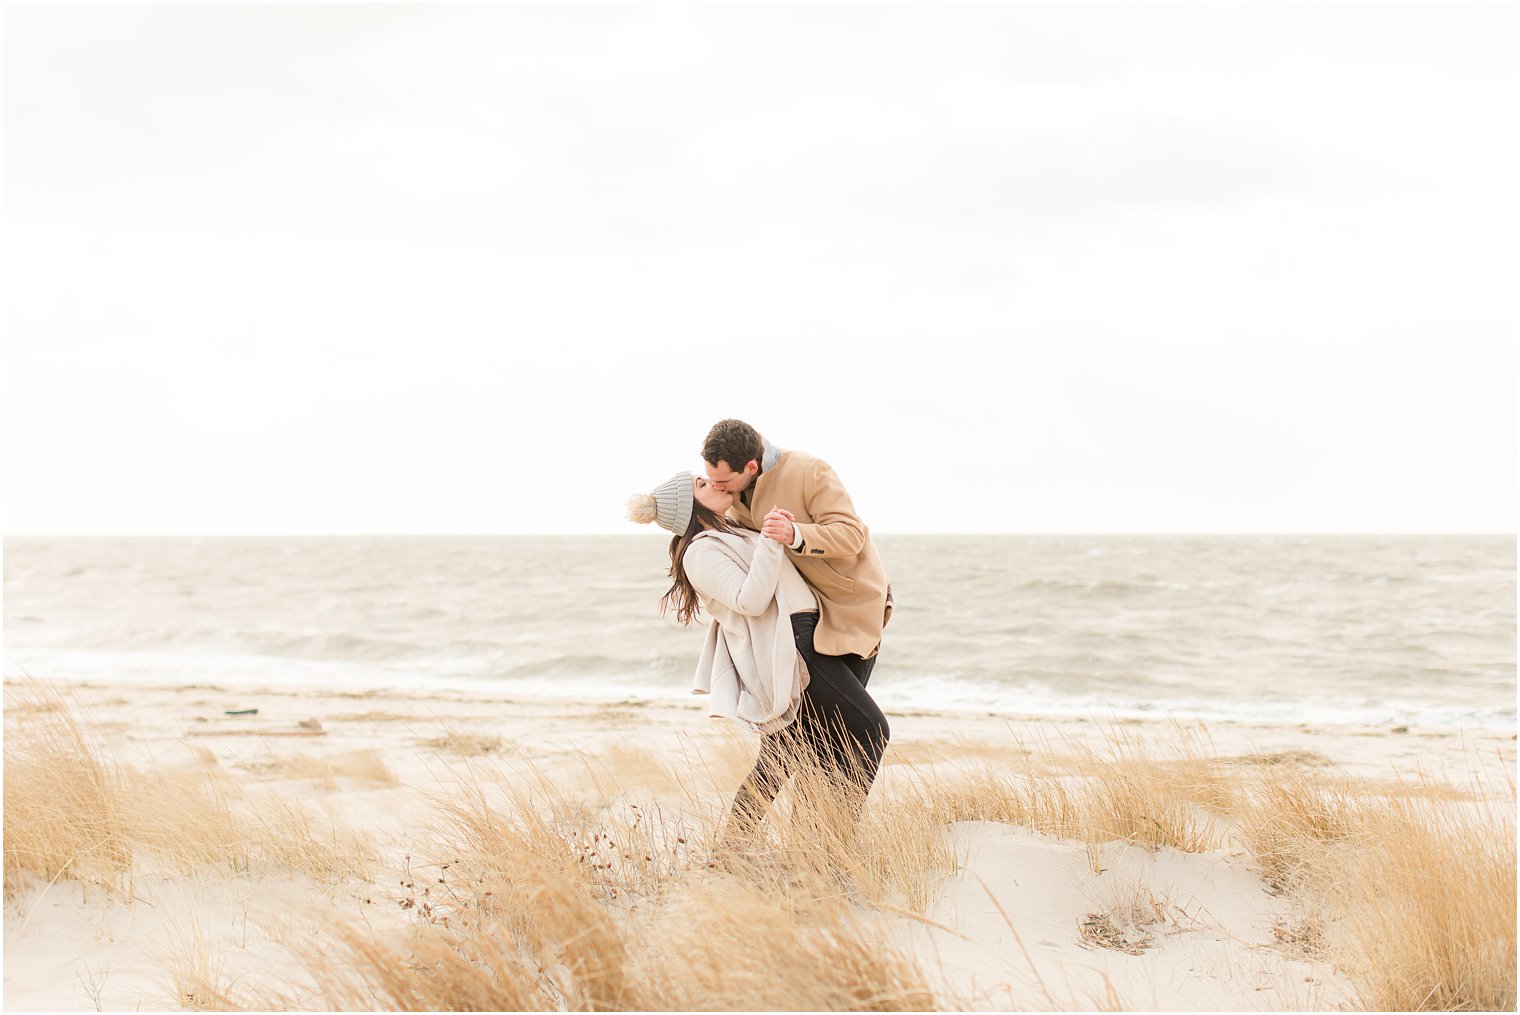 Engaged couple kissing in the sand dunes on the beach in Cape May